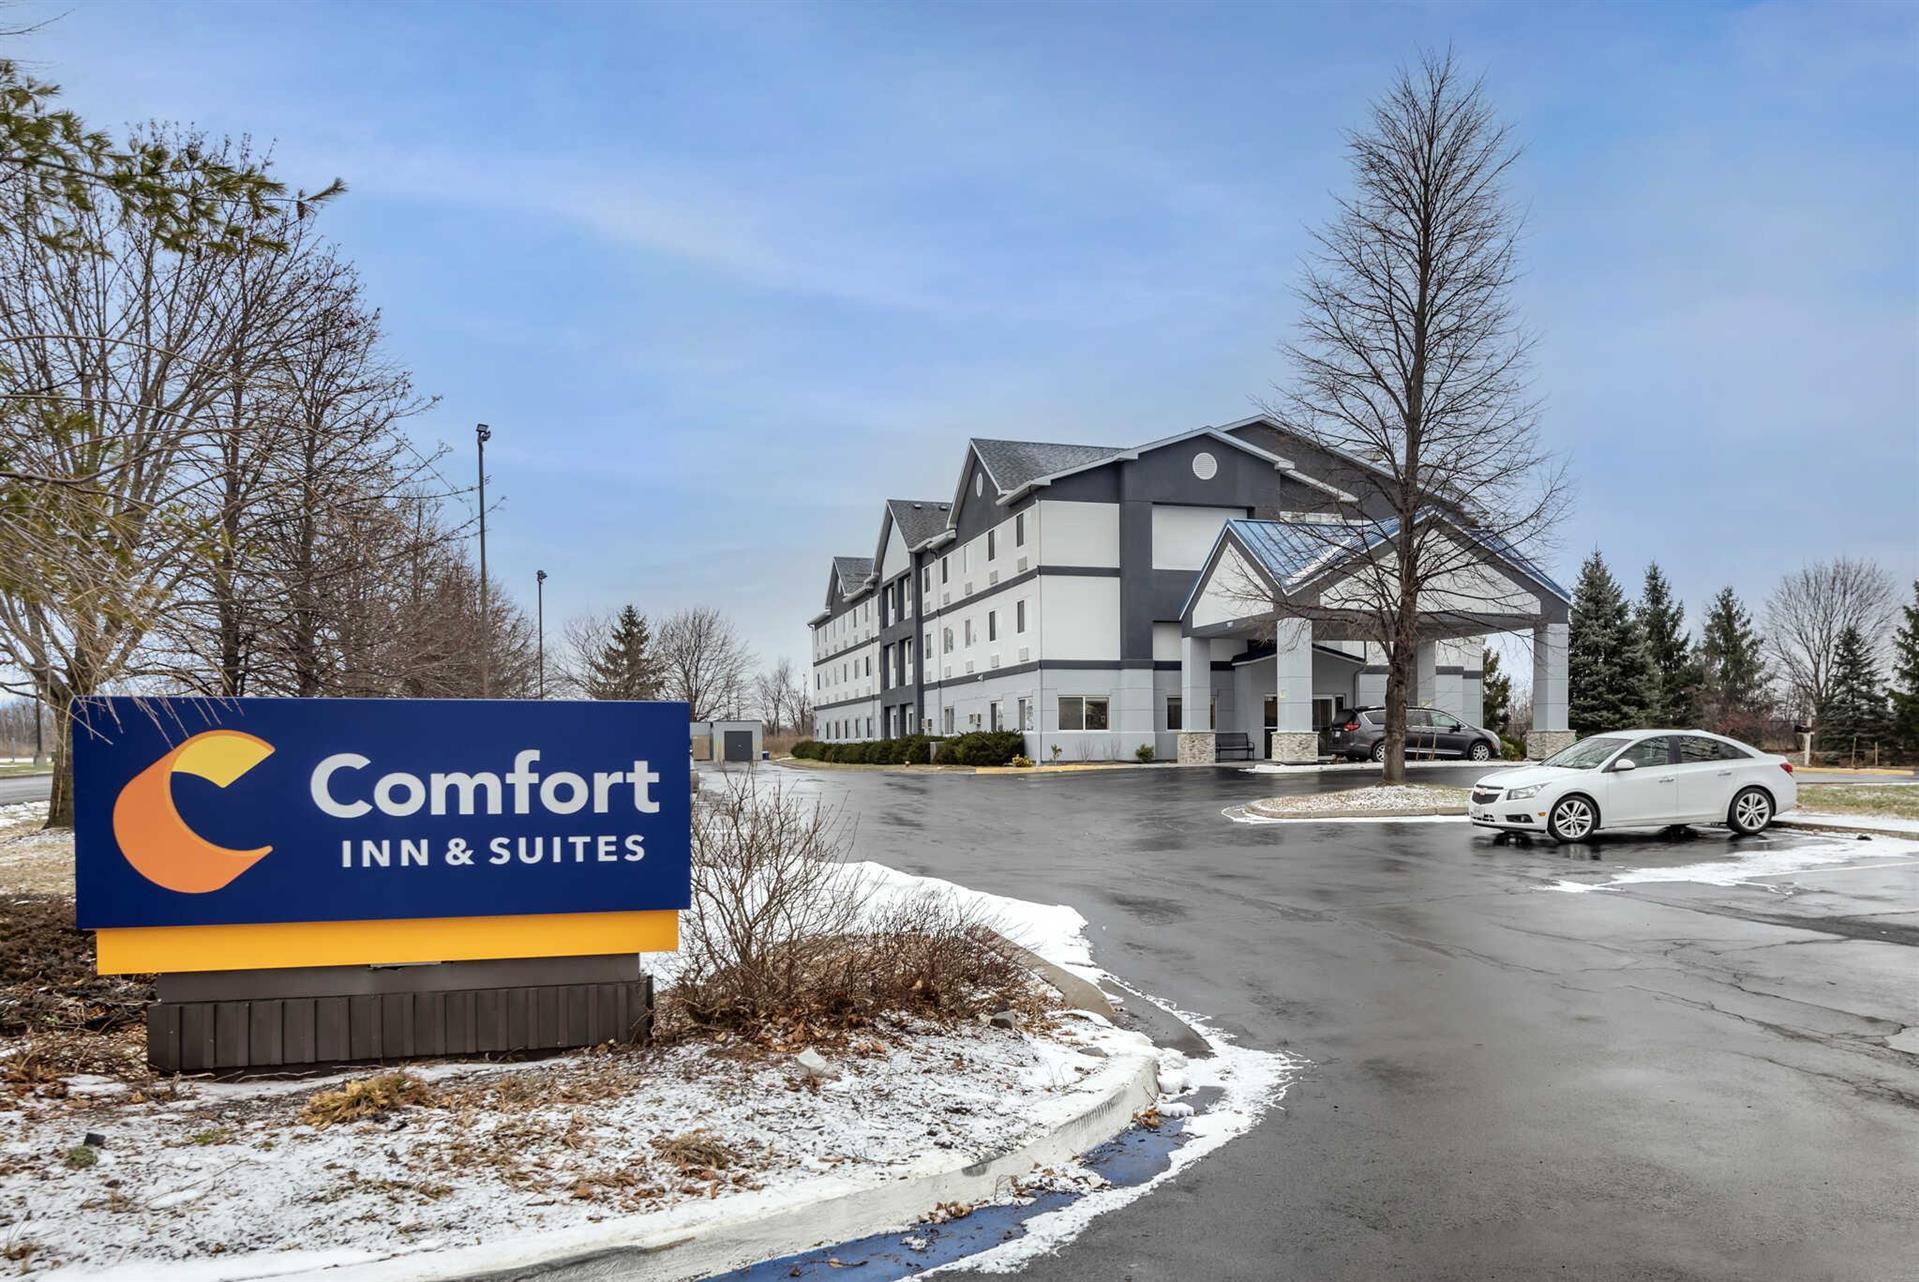 Comfort Inn & Suites - Liverpool in Liverpool, NY